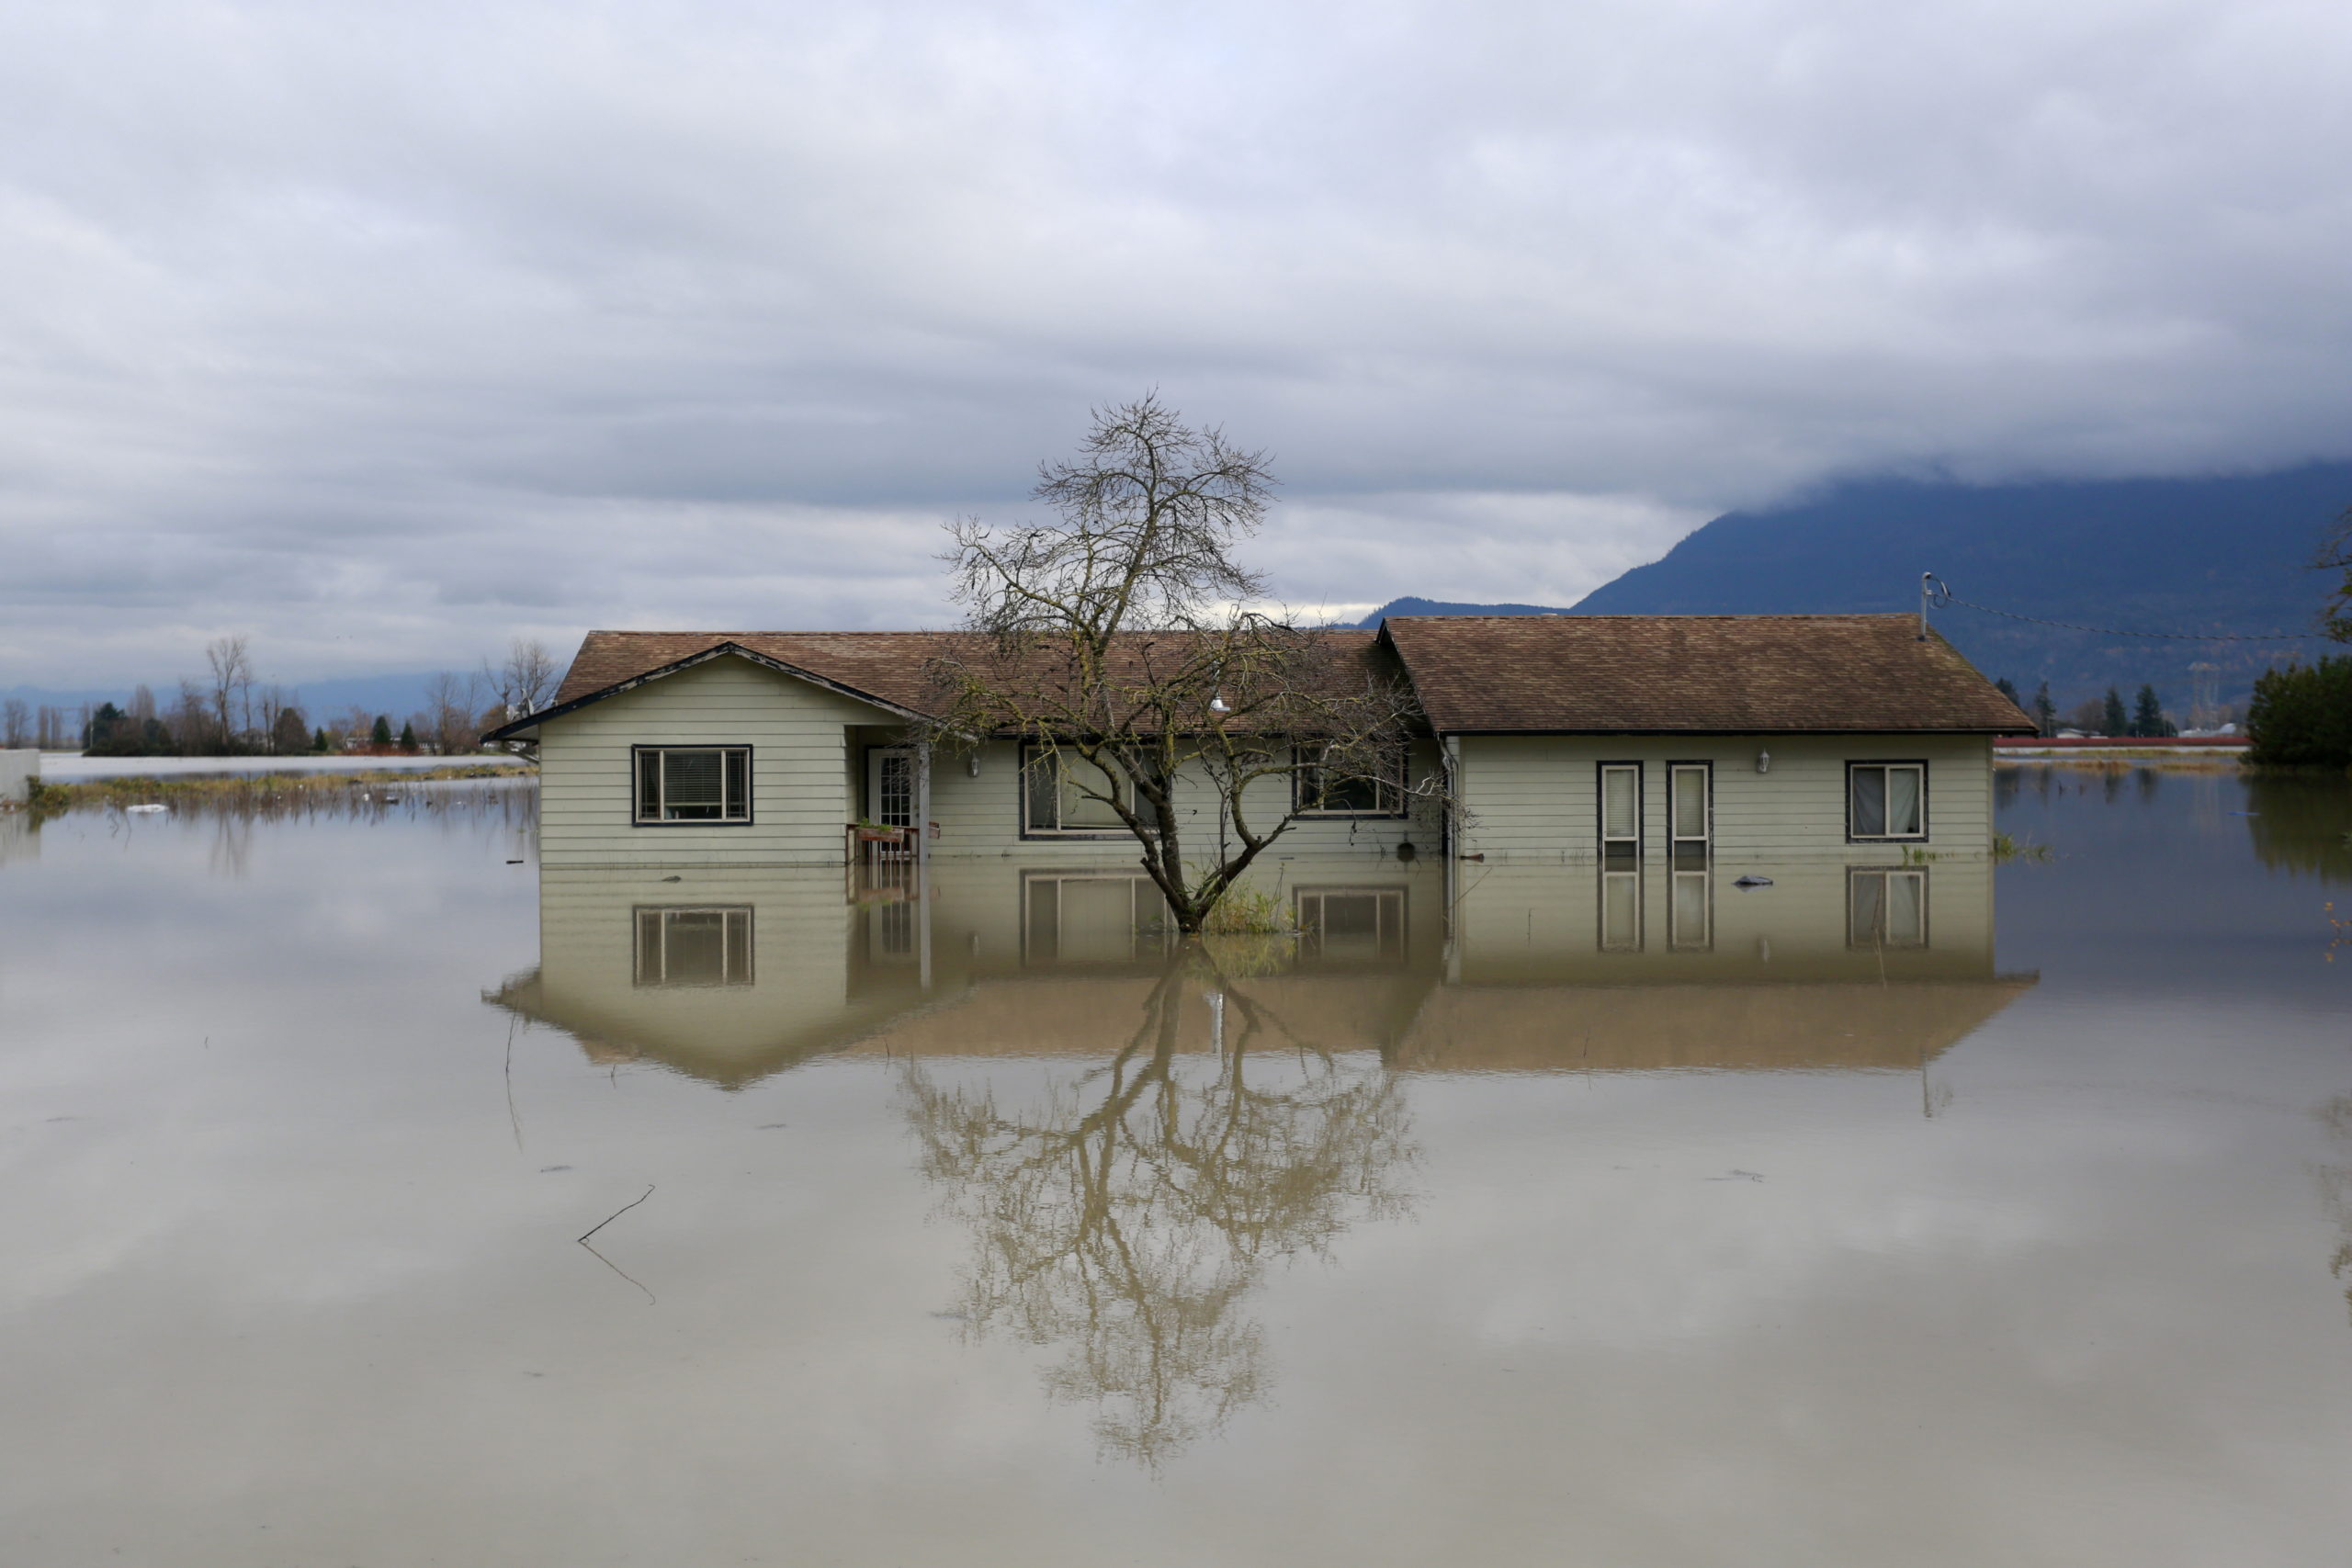 A home surrounded by floodwaters in the Yarrow neighbourhood after rainstorms caused flooding and landslides in Chilliwack, British Columbia, Canada November 20, 2021. REUTERS/Jesse Winter